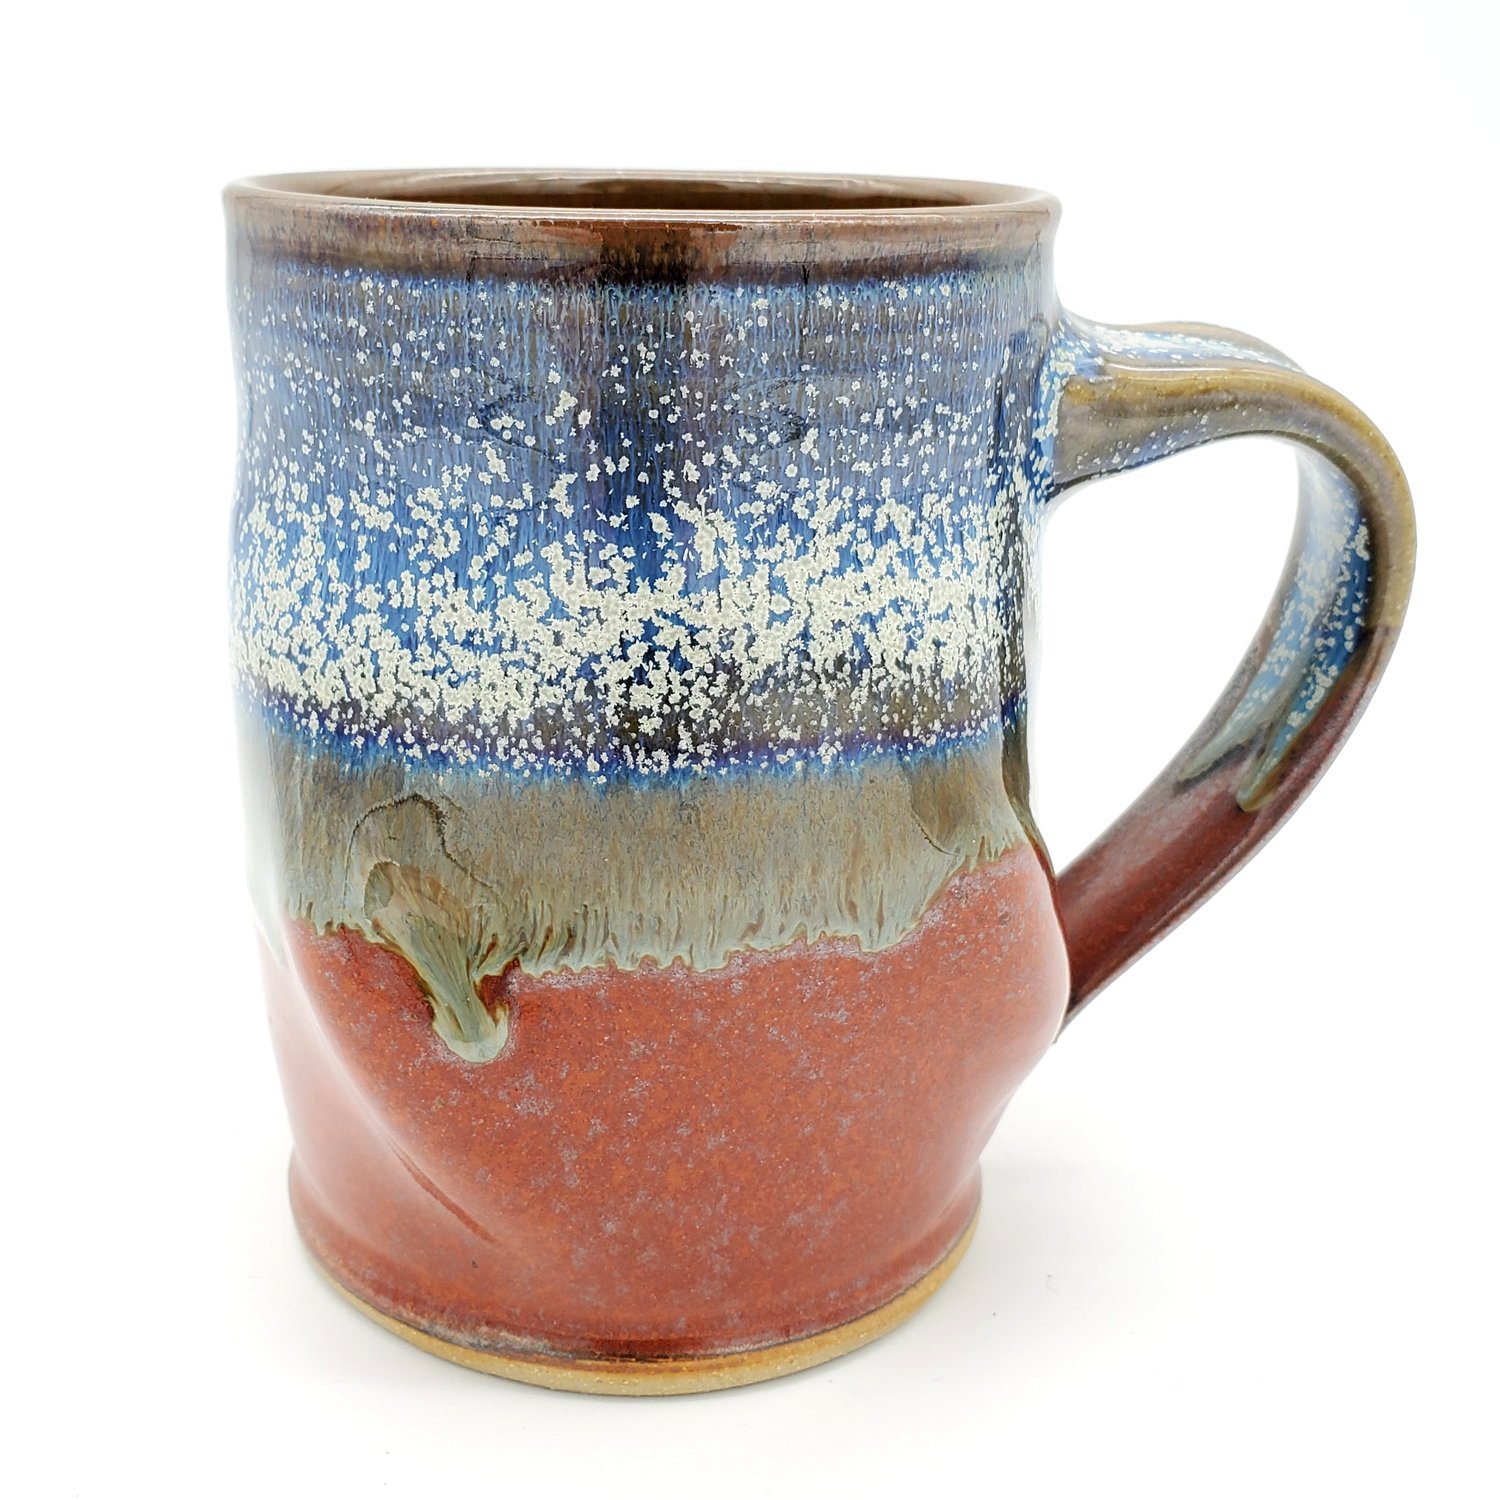 Bumpy mug - speckle blue and red